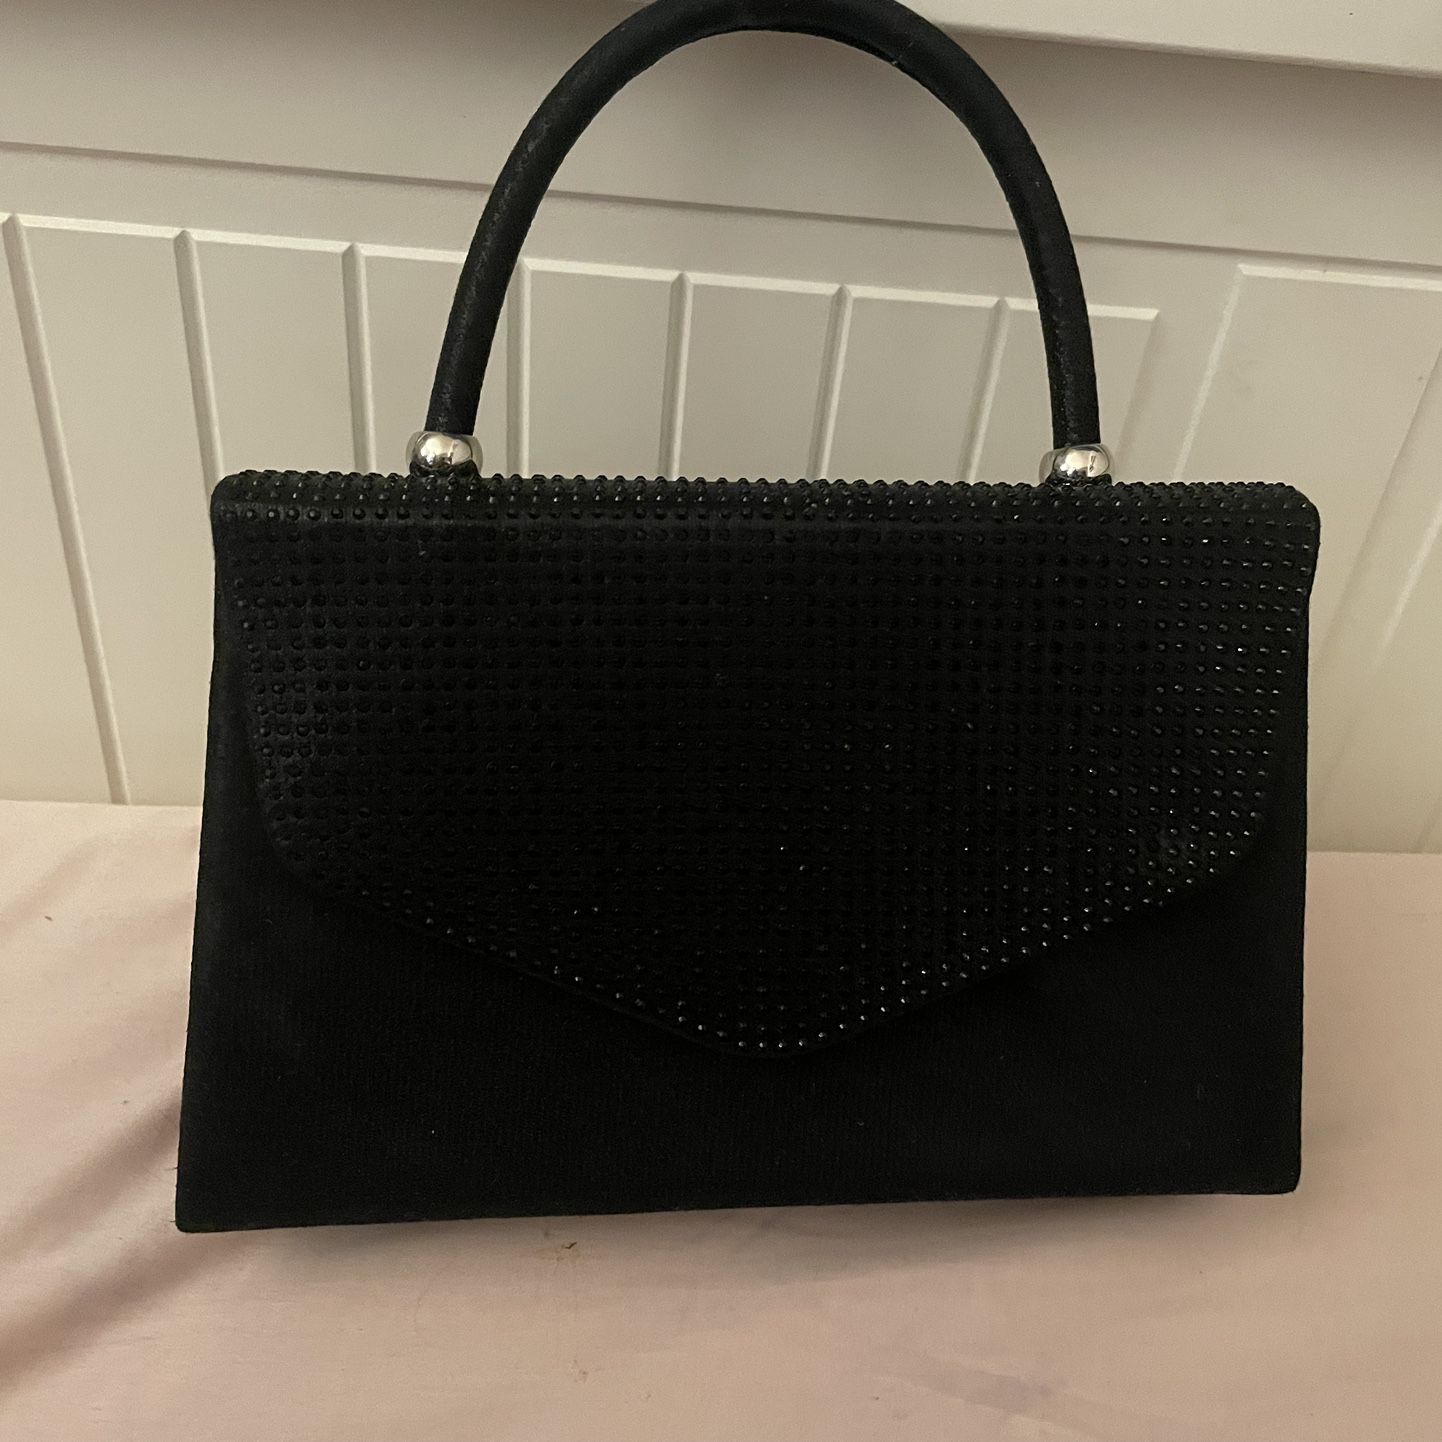 Louis Vuitton Twist PM Bags for Sale in Alhambra, CA - OfferUp